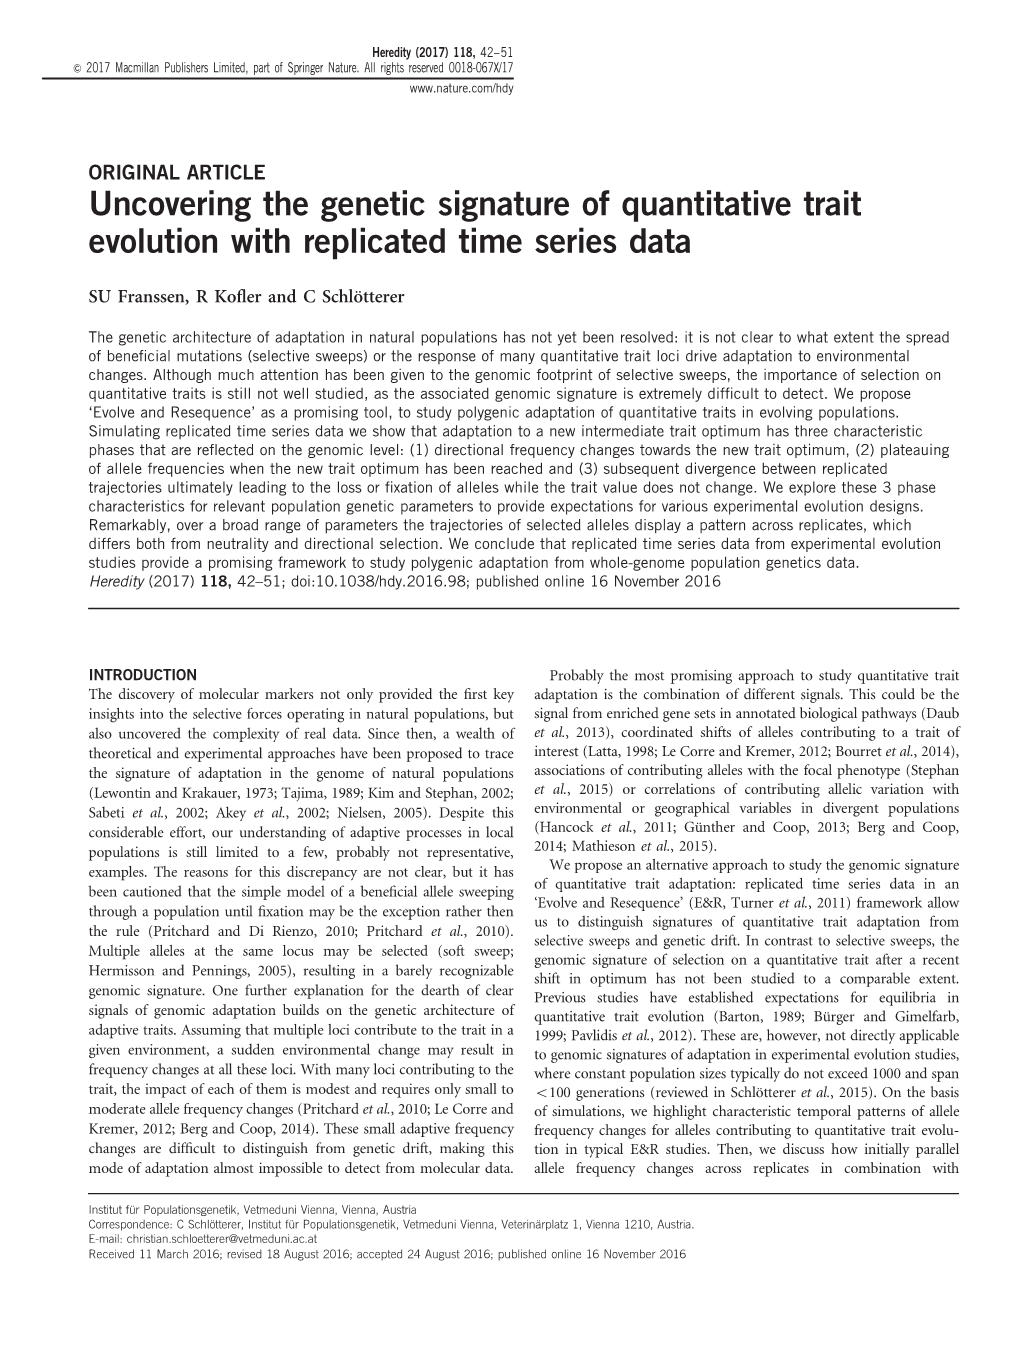 Uncovering the Genetic Signature of Quantitative Trait Evolution with Replicated Time Series Data